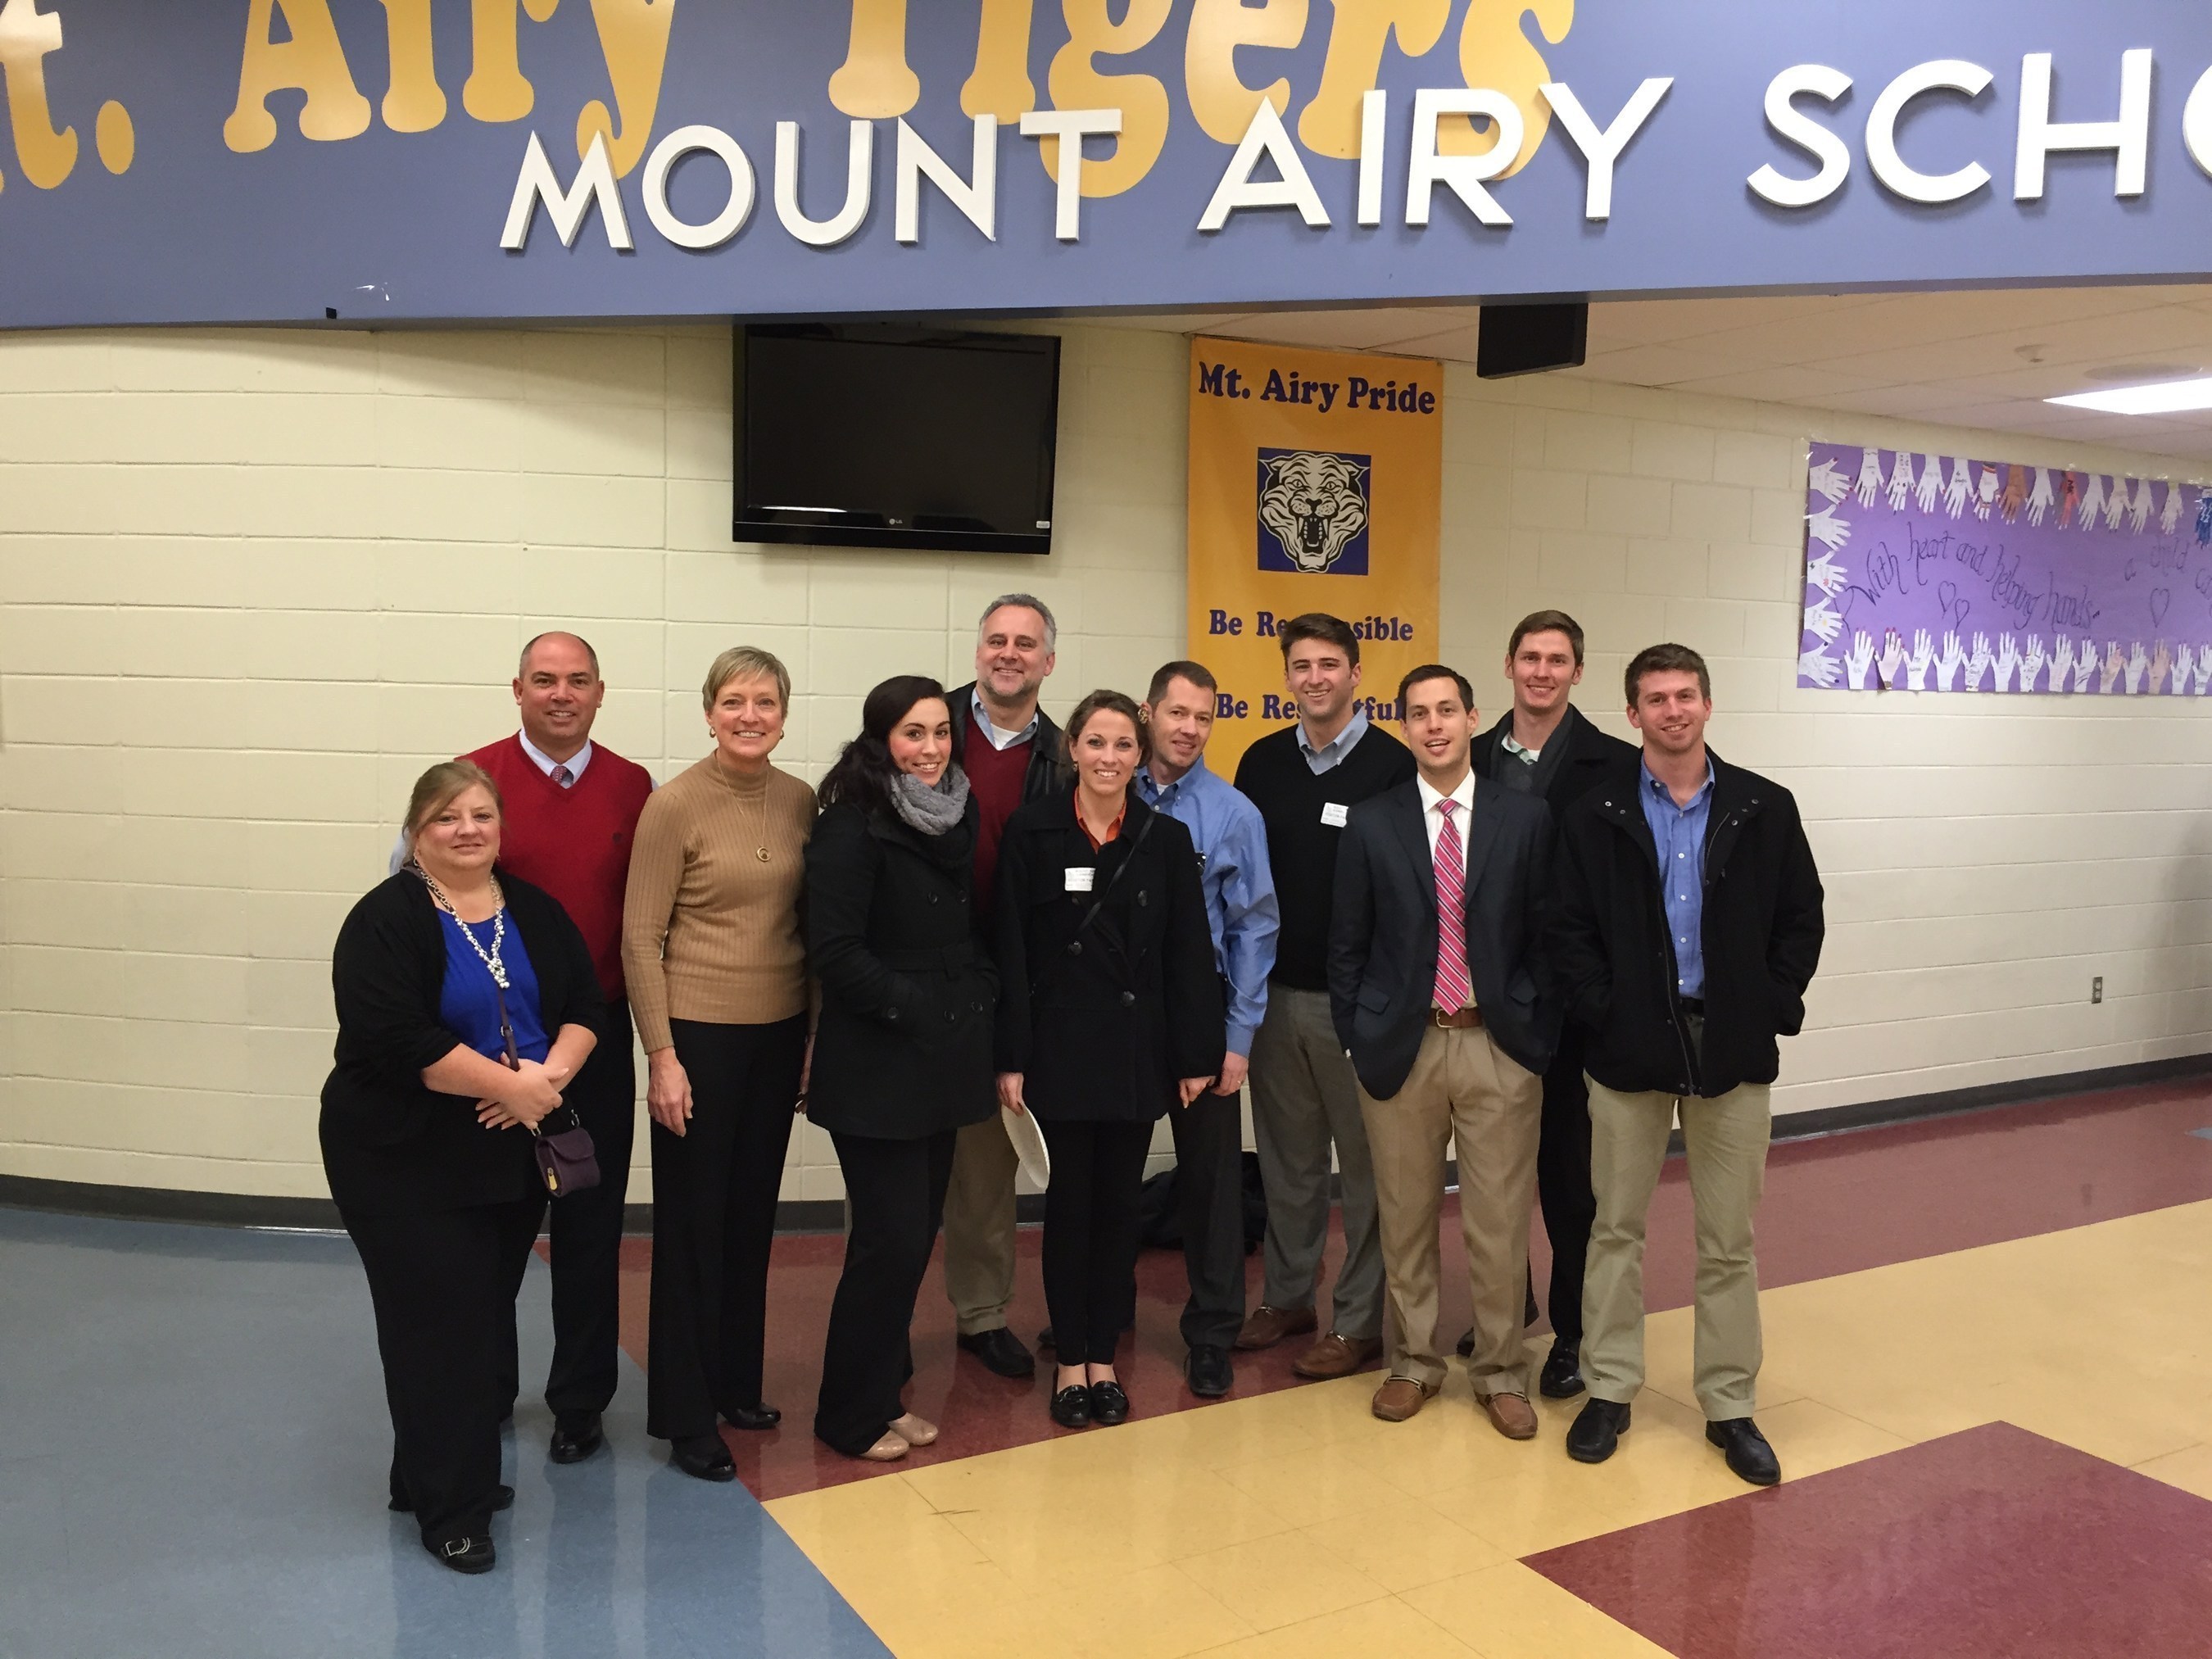 ADP Greater Cincinnati employees volunteer with Accounting for Kids to teach finance fundamentals at the Mt. Airy Elementary School.